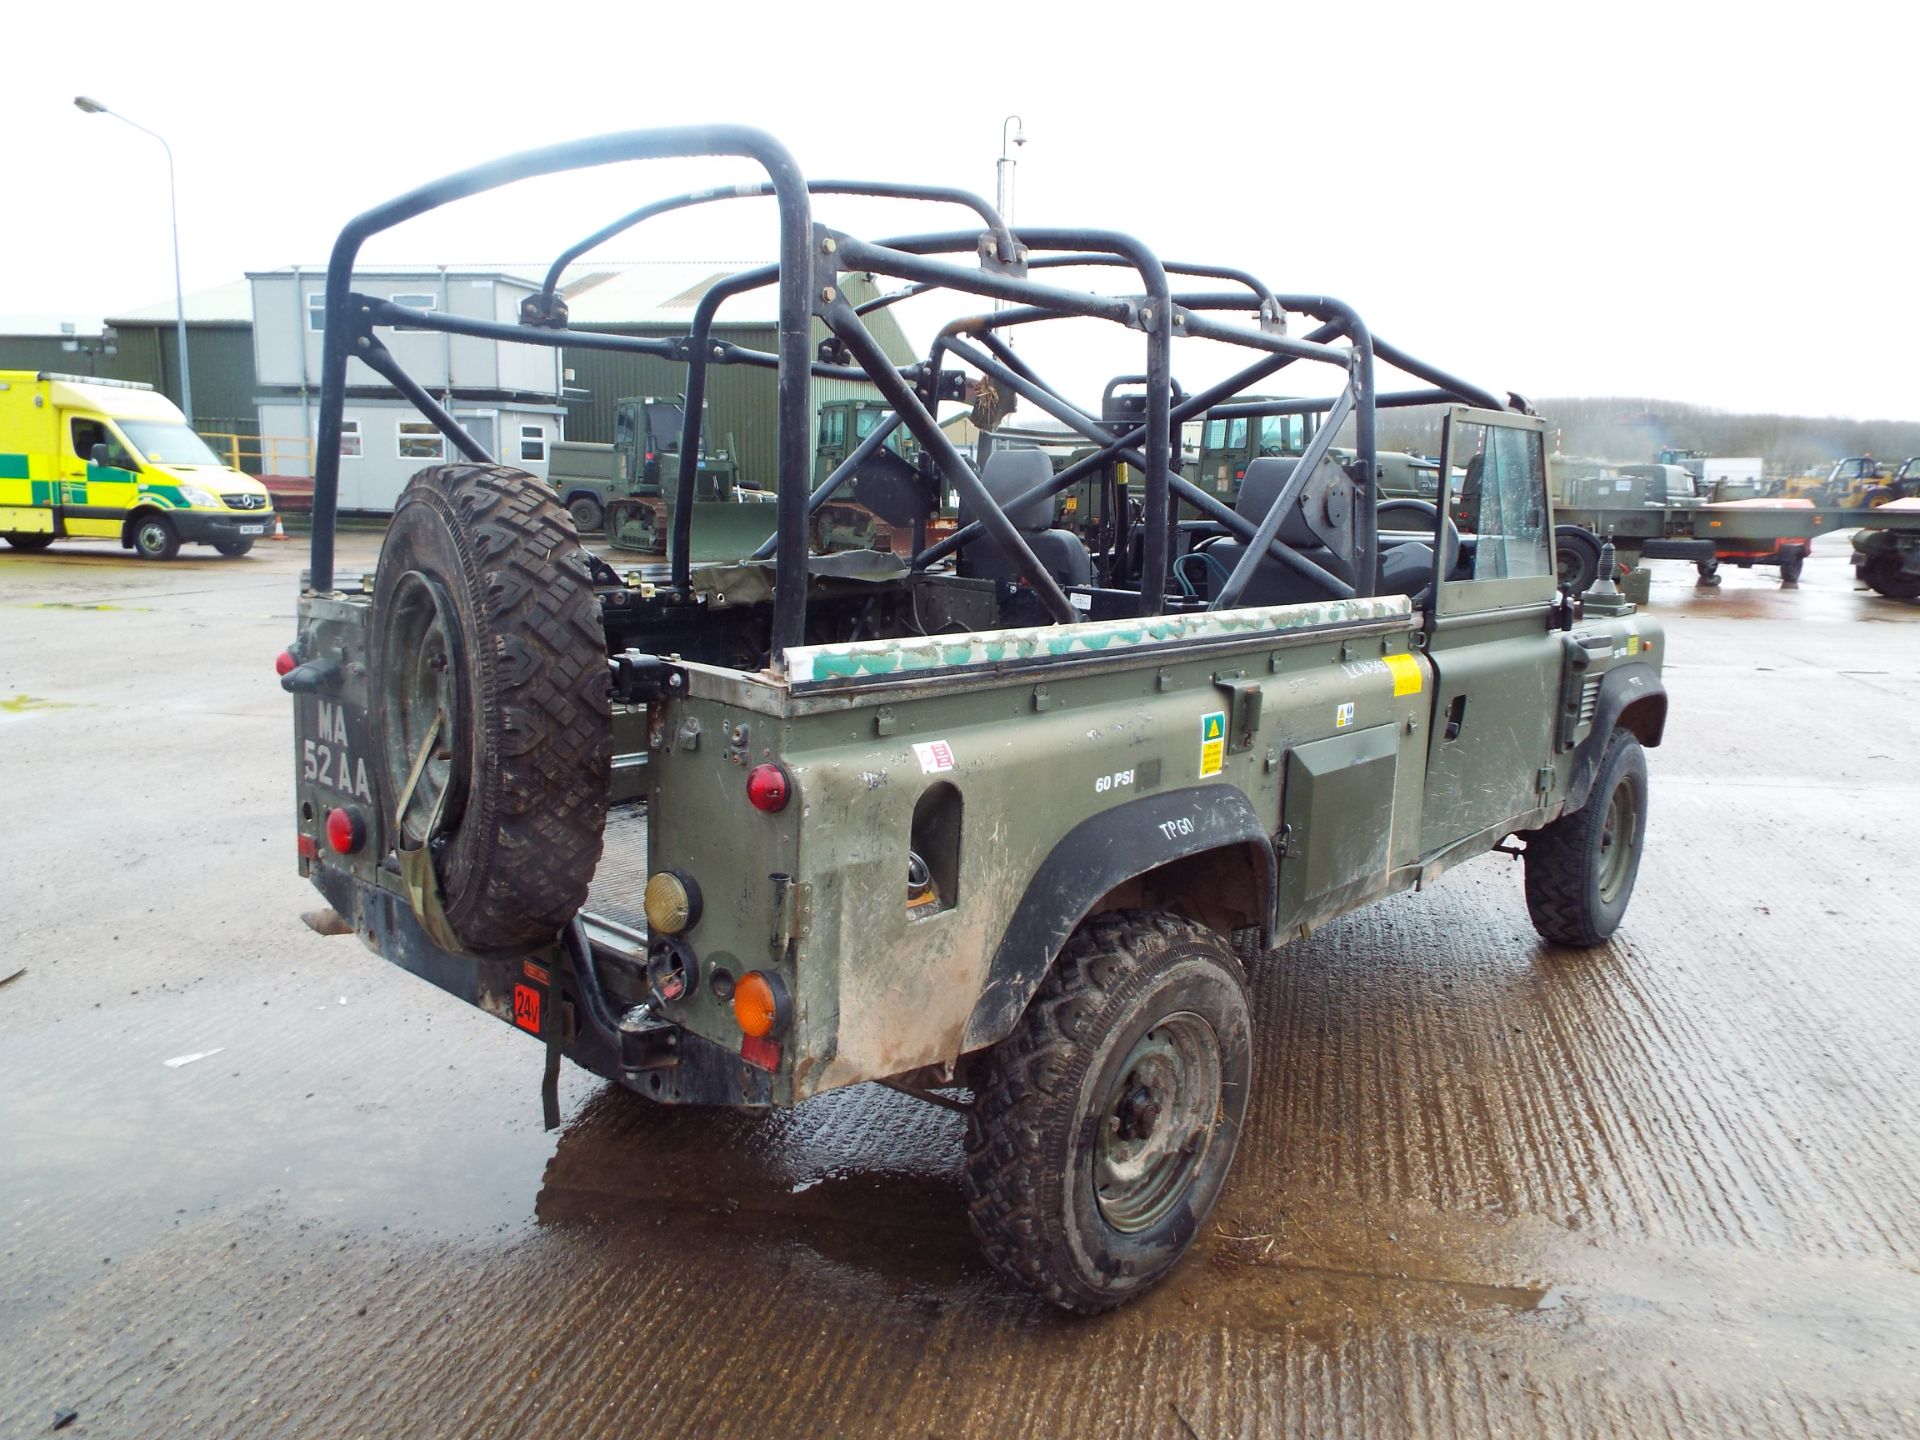 Military Specification Land Rover Wolf 110 Hard Top - Image 8 of 27